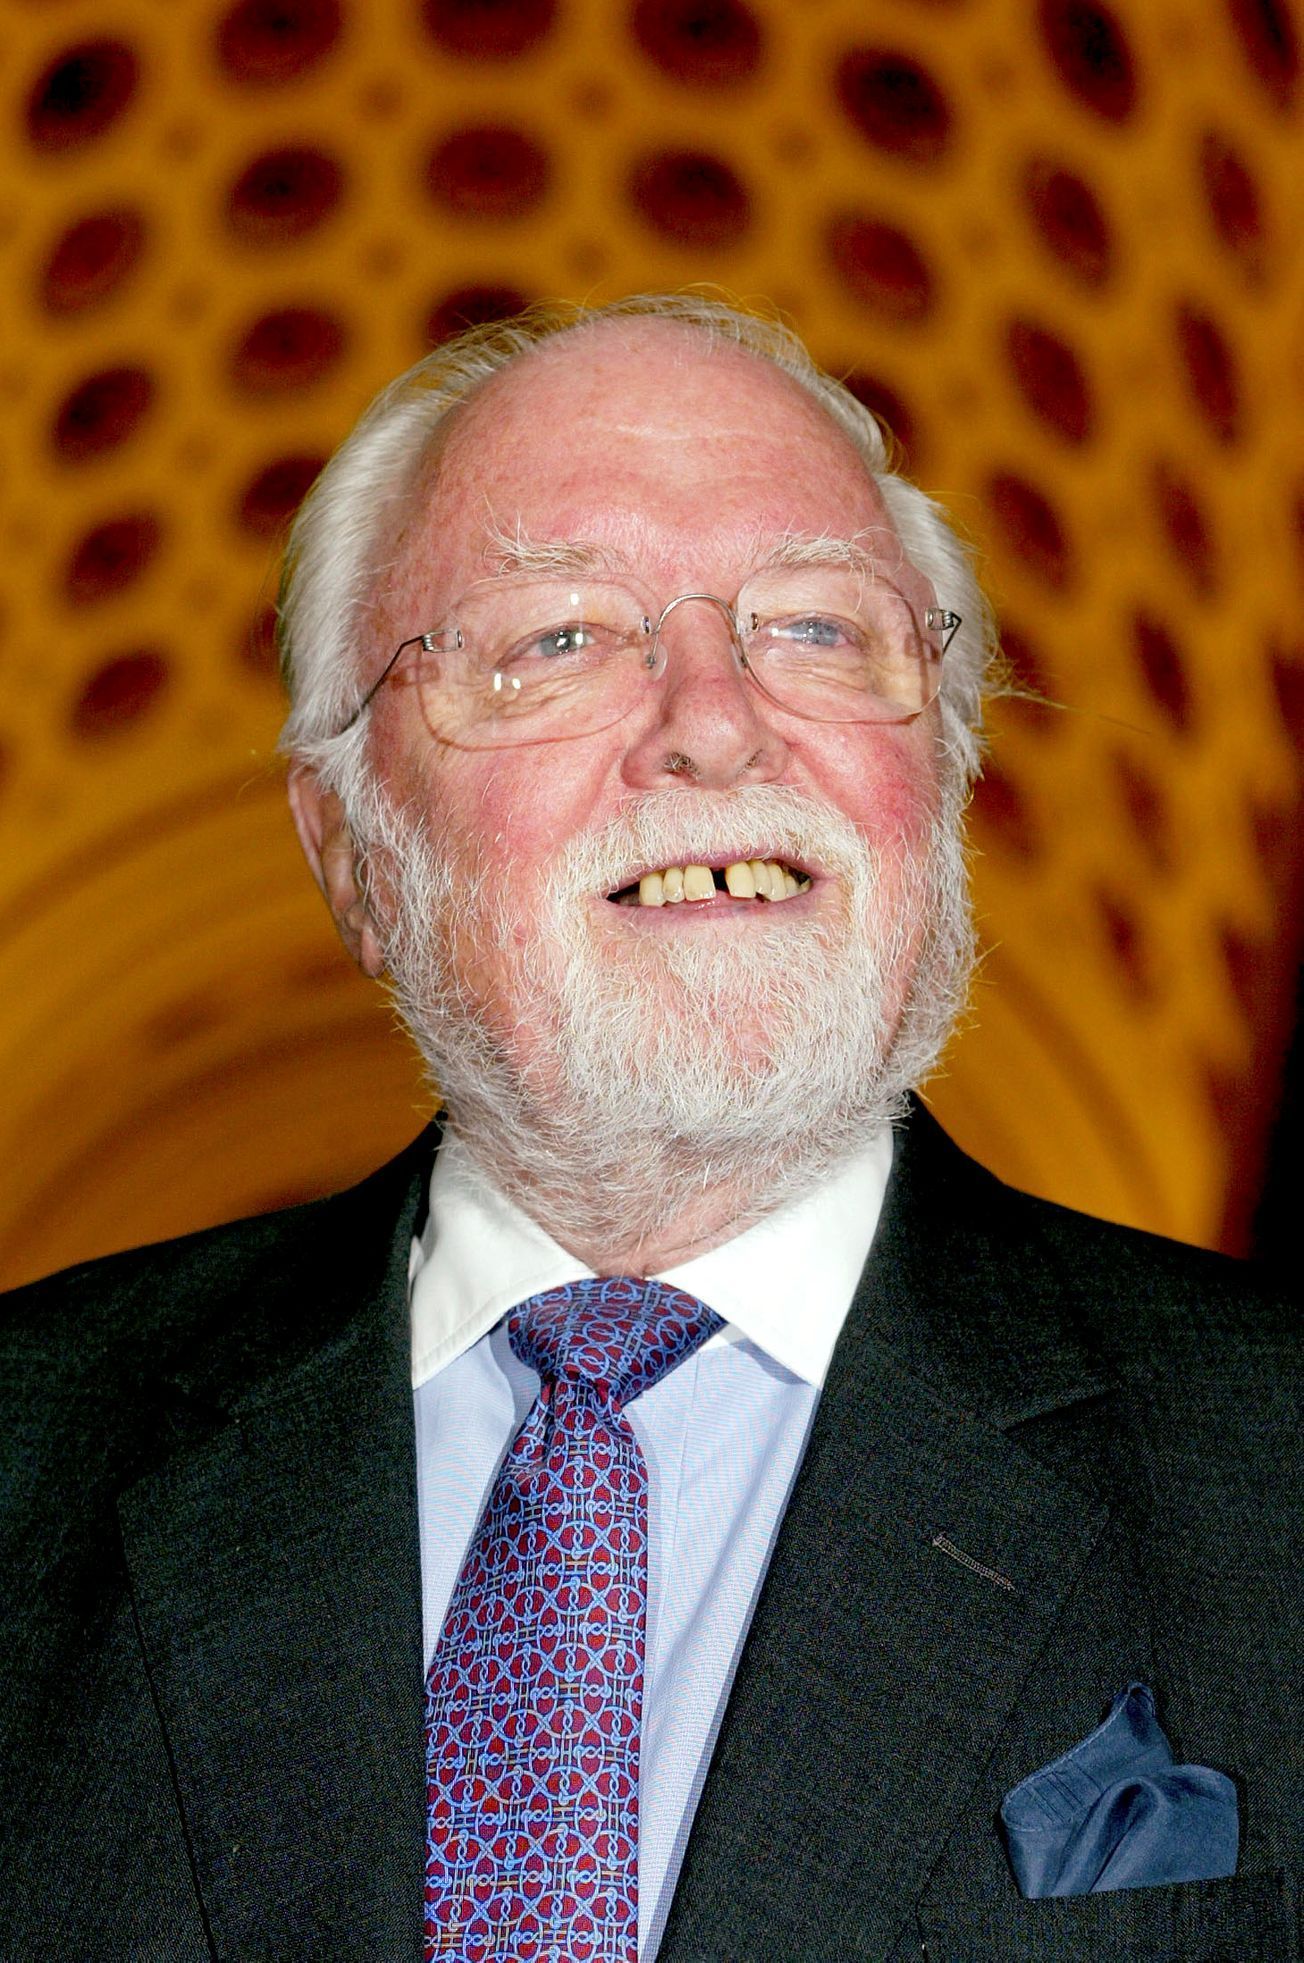 File picture shows British filmmaker Sir Richard Attenborough arriving at a reception hosted by Britain's Queen Elizabeth II at Buckingham Palace in London